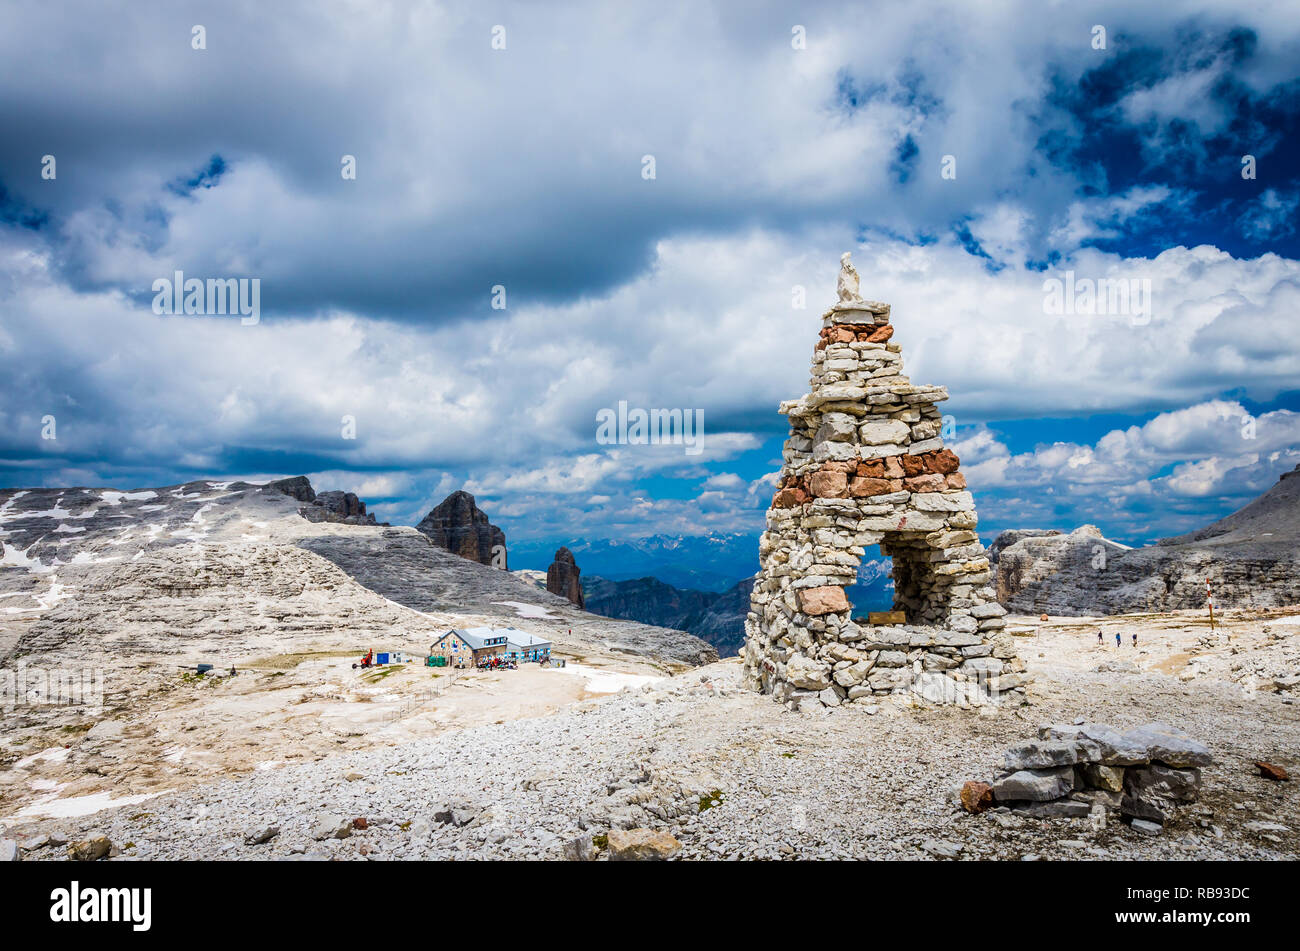 Sella massif, Dolomites mountains, Italian Alps. Cairn on the stone in the foreground and rifugio Boe in the second plane. Hiking to Piz Boe Stock Photo